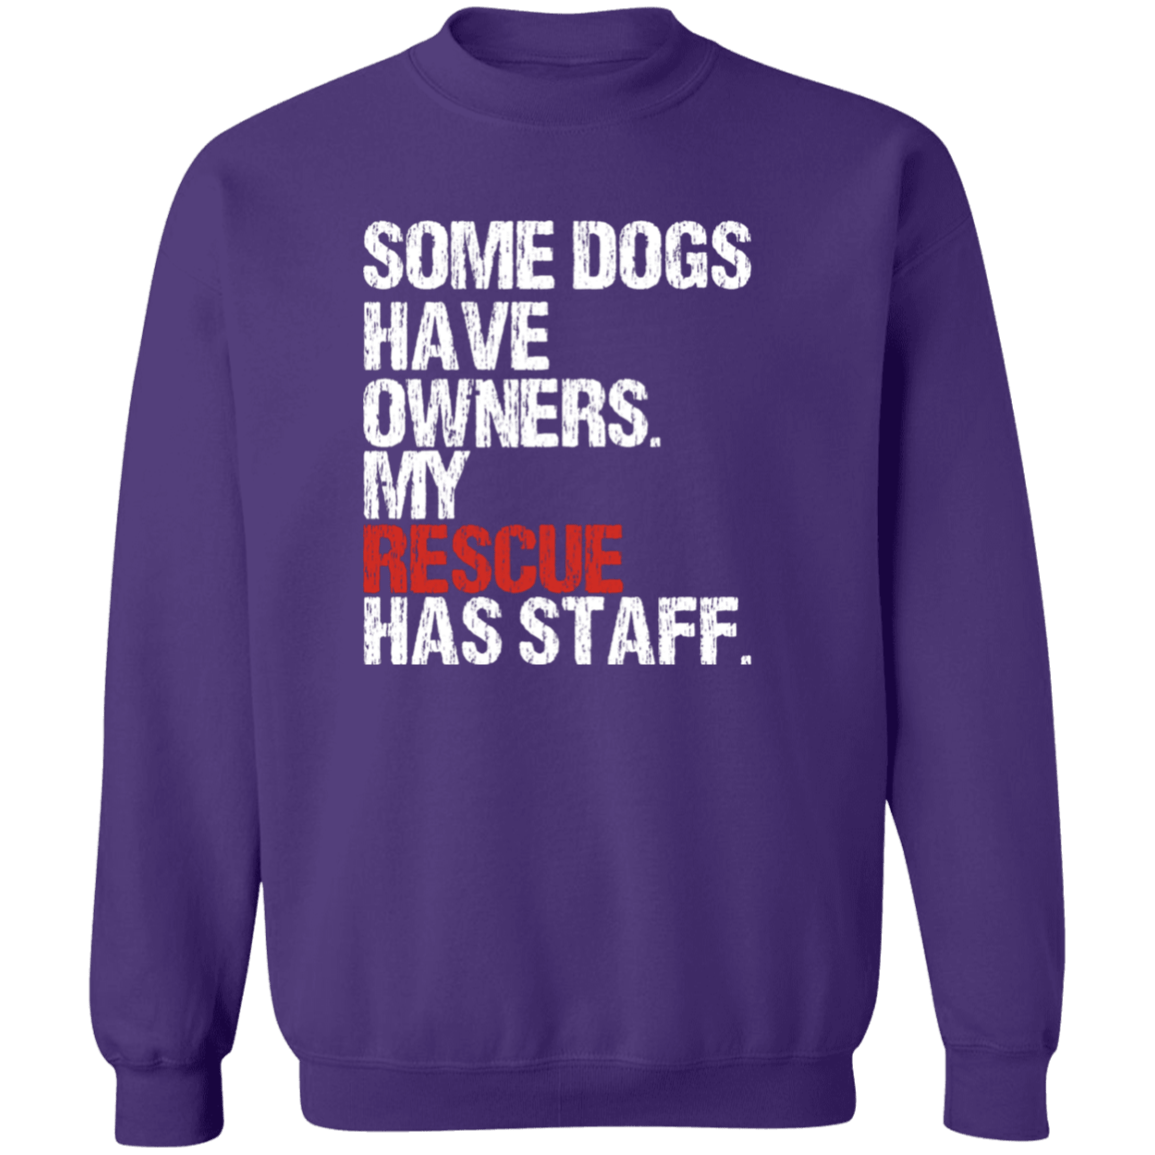 Some Dogs Have Owners - Sweatshirt.